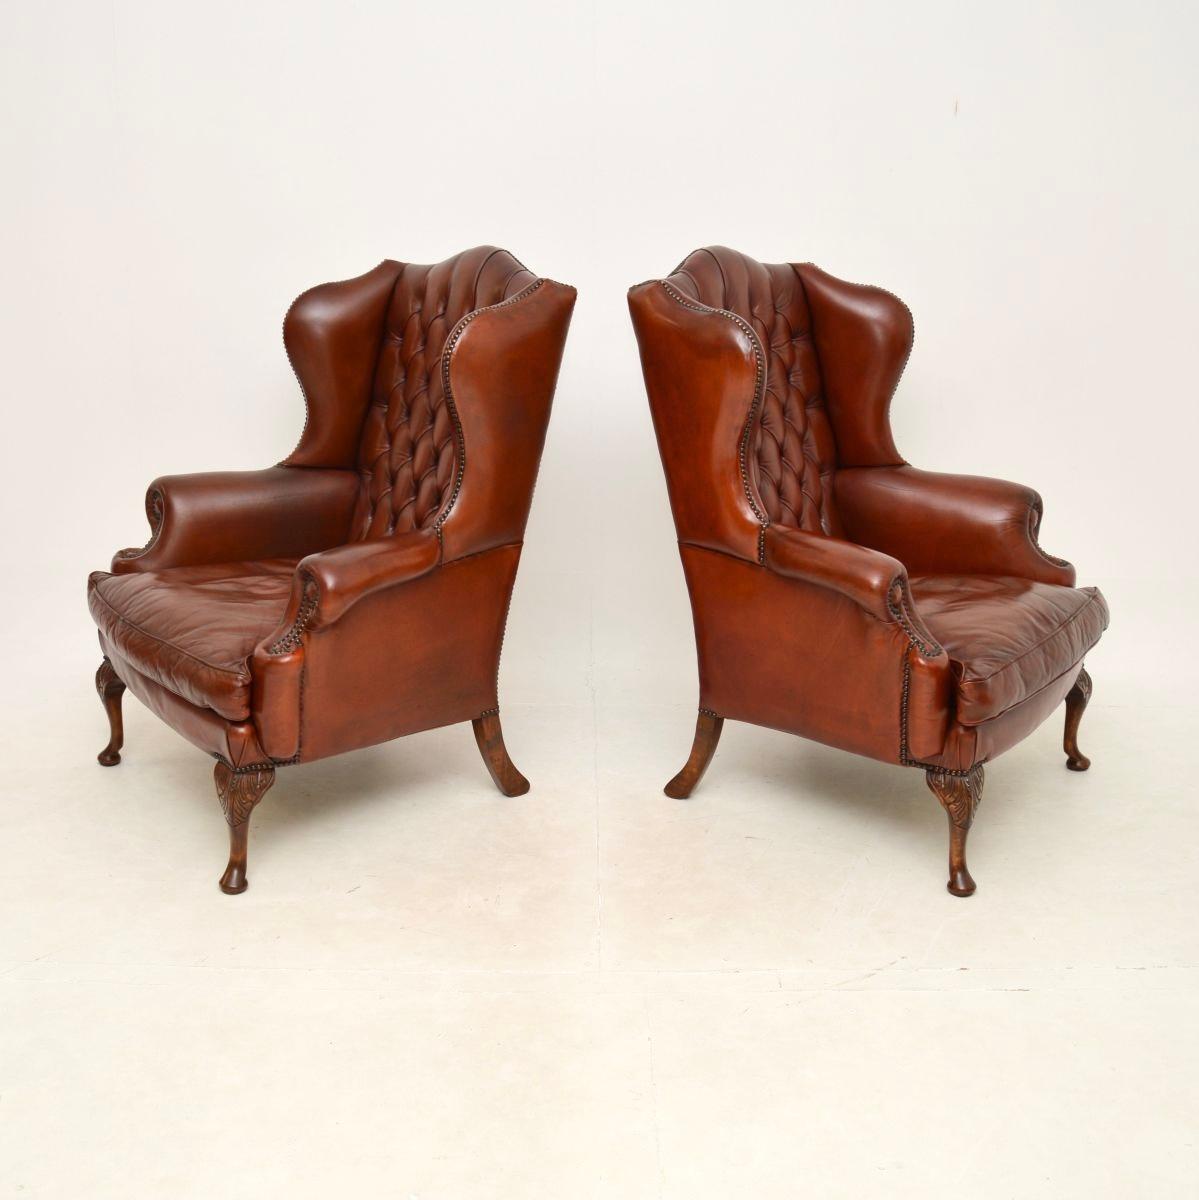 Georgian Pair of Antique Leather Wing Back Armchairs For Sale